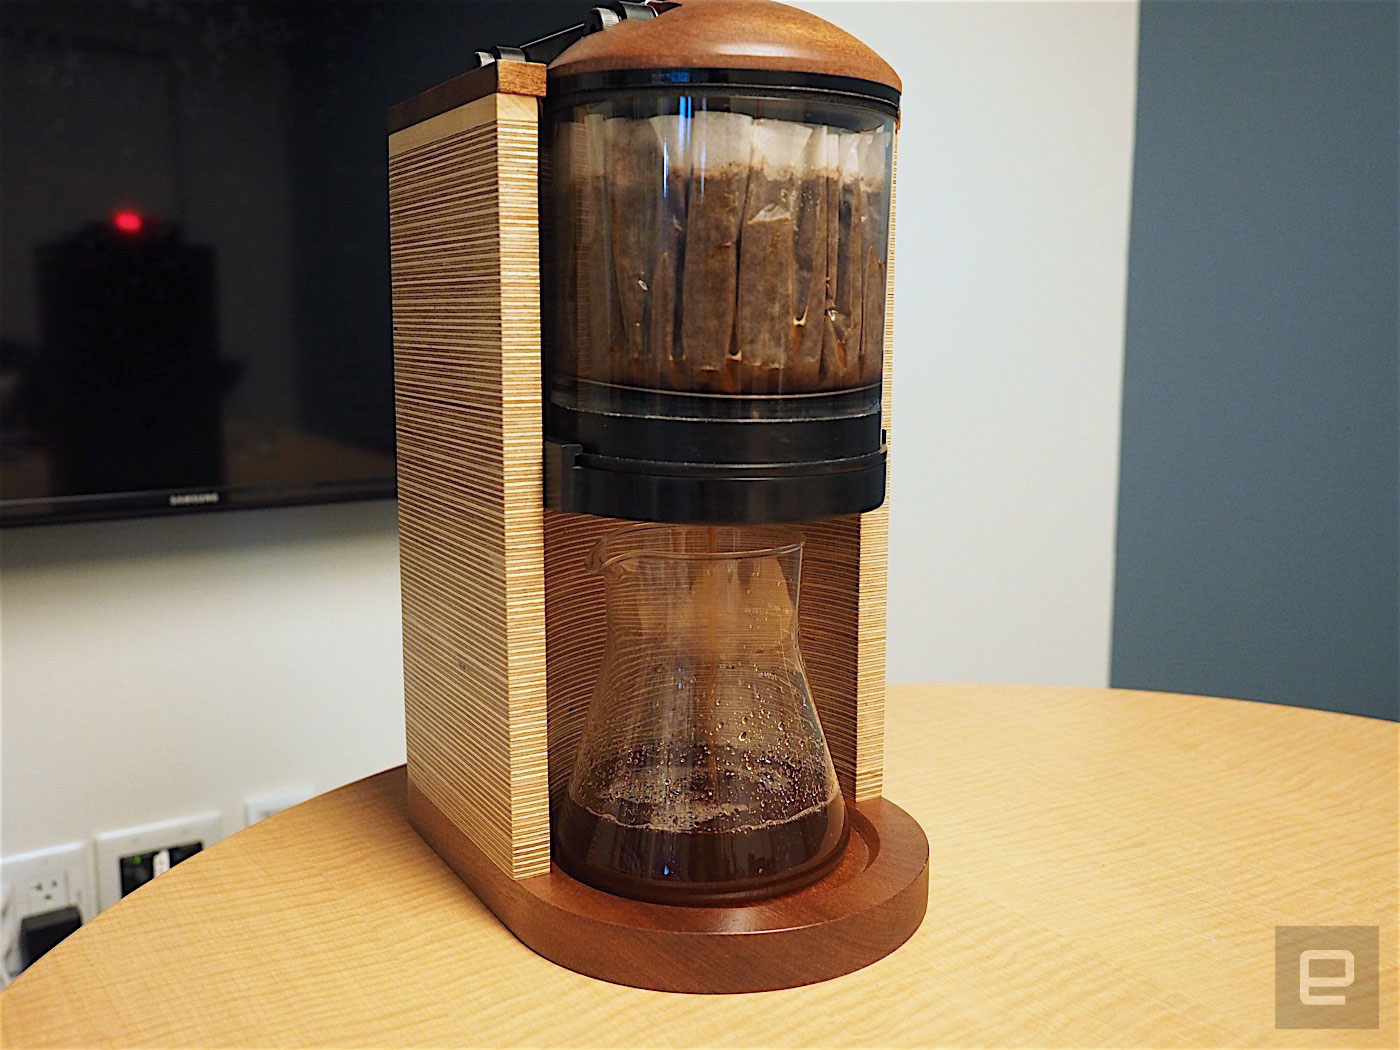 This machine makes cold brew coffee in less than 10 minutes